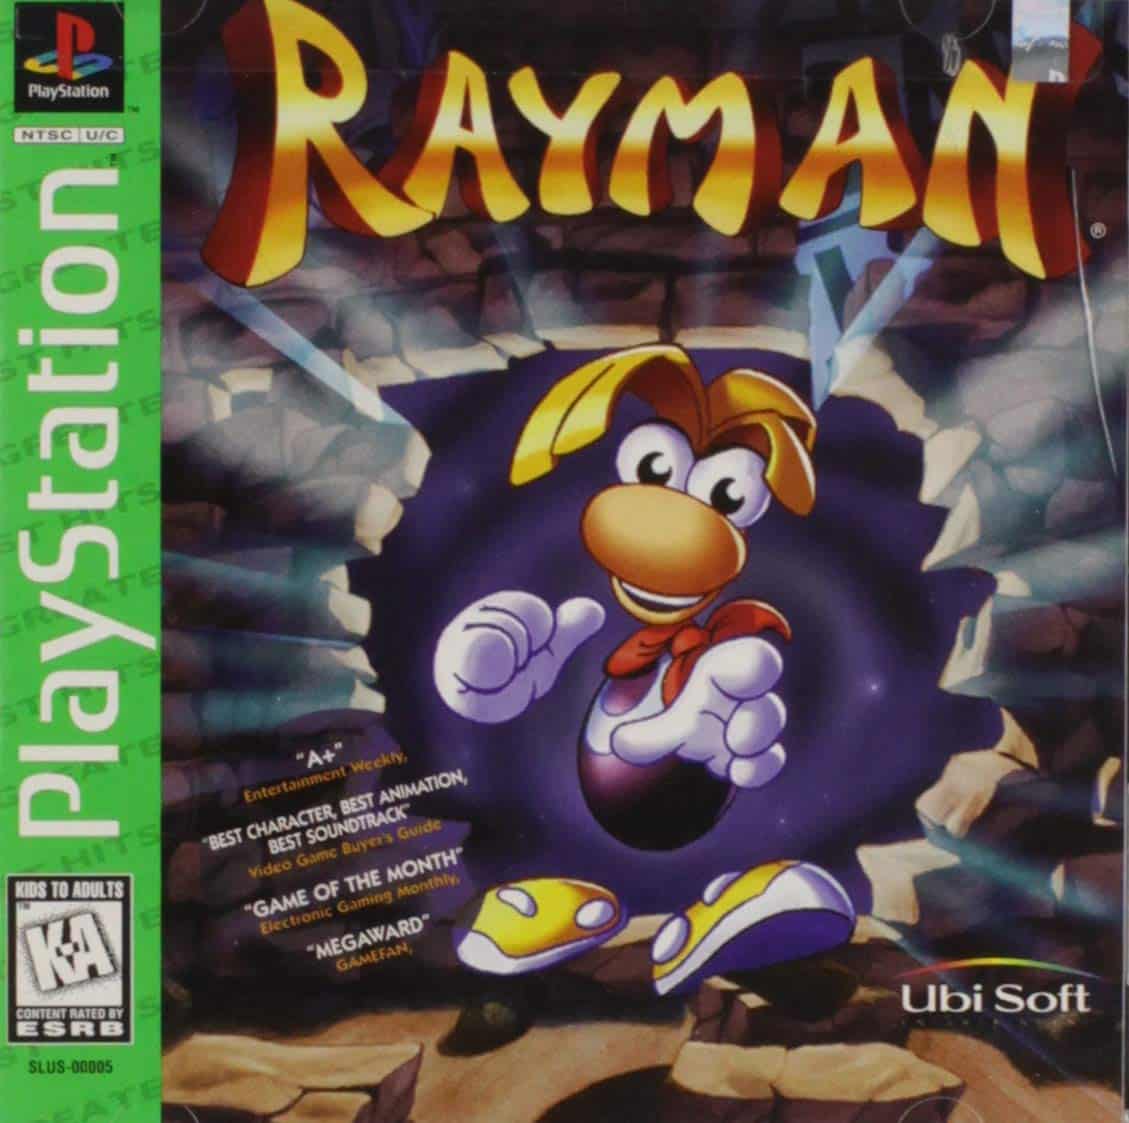 Rayman player count stats